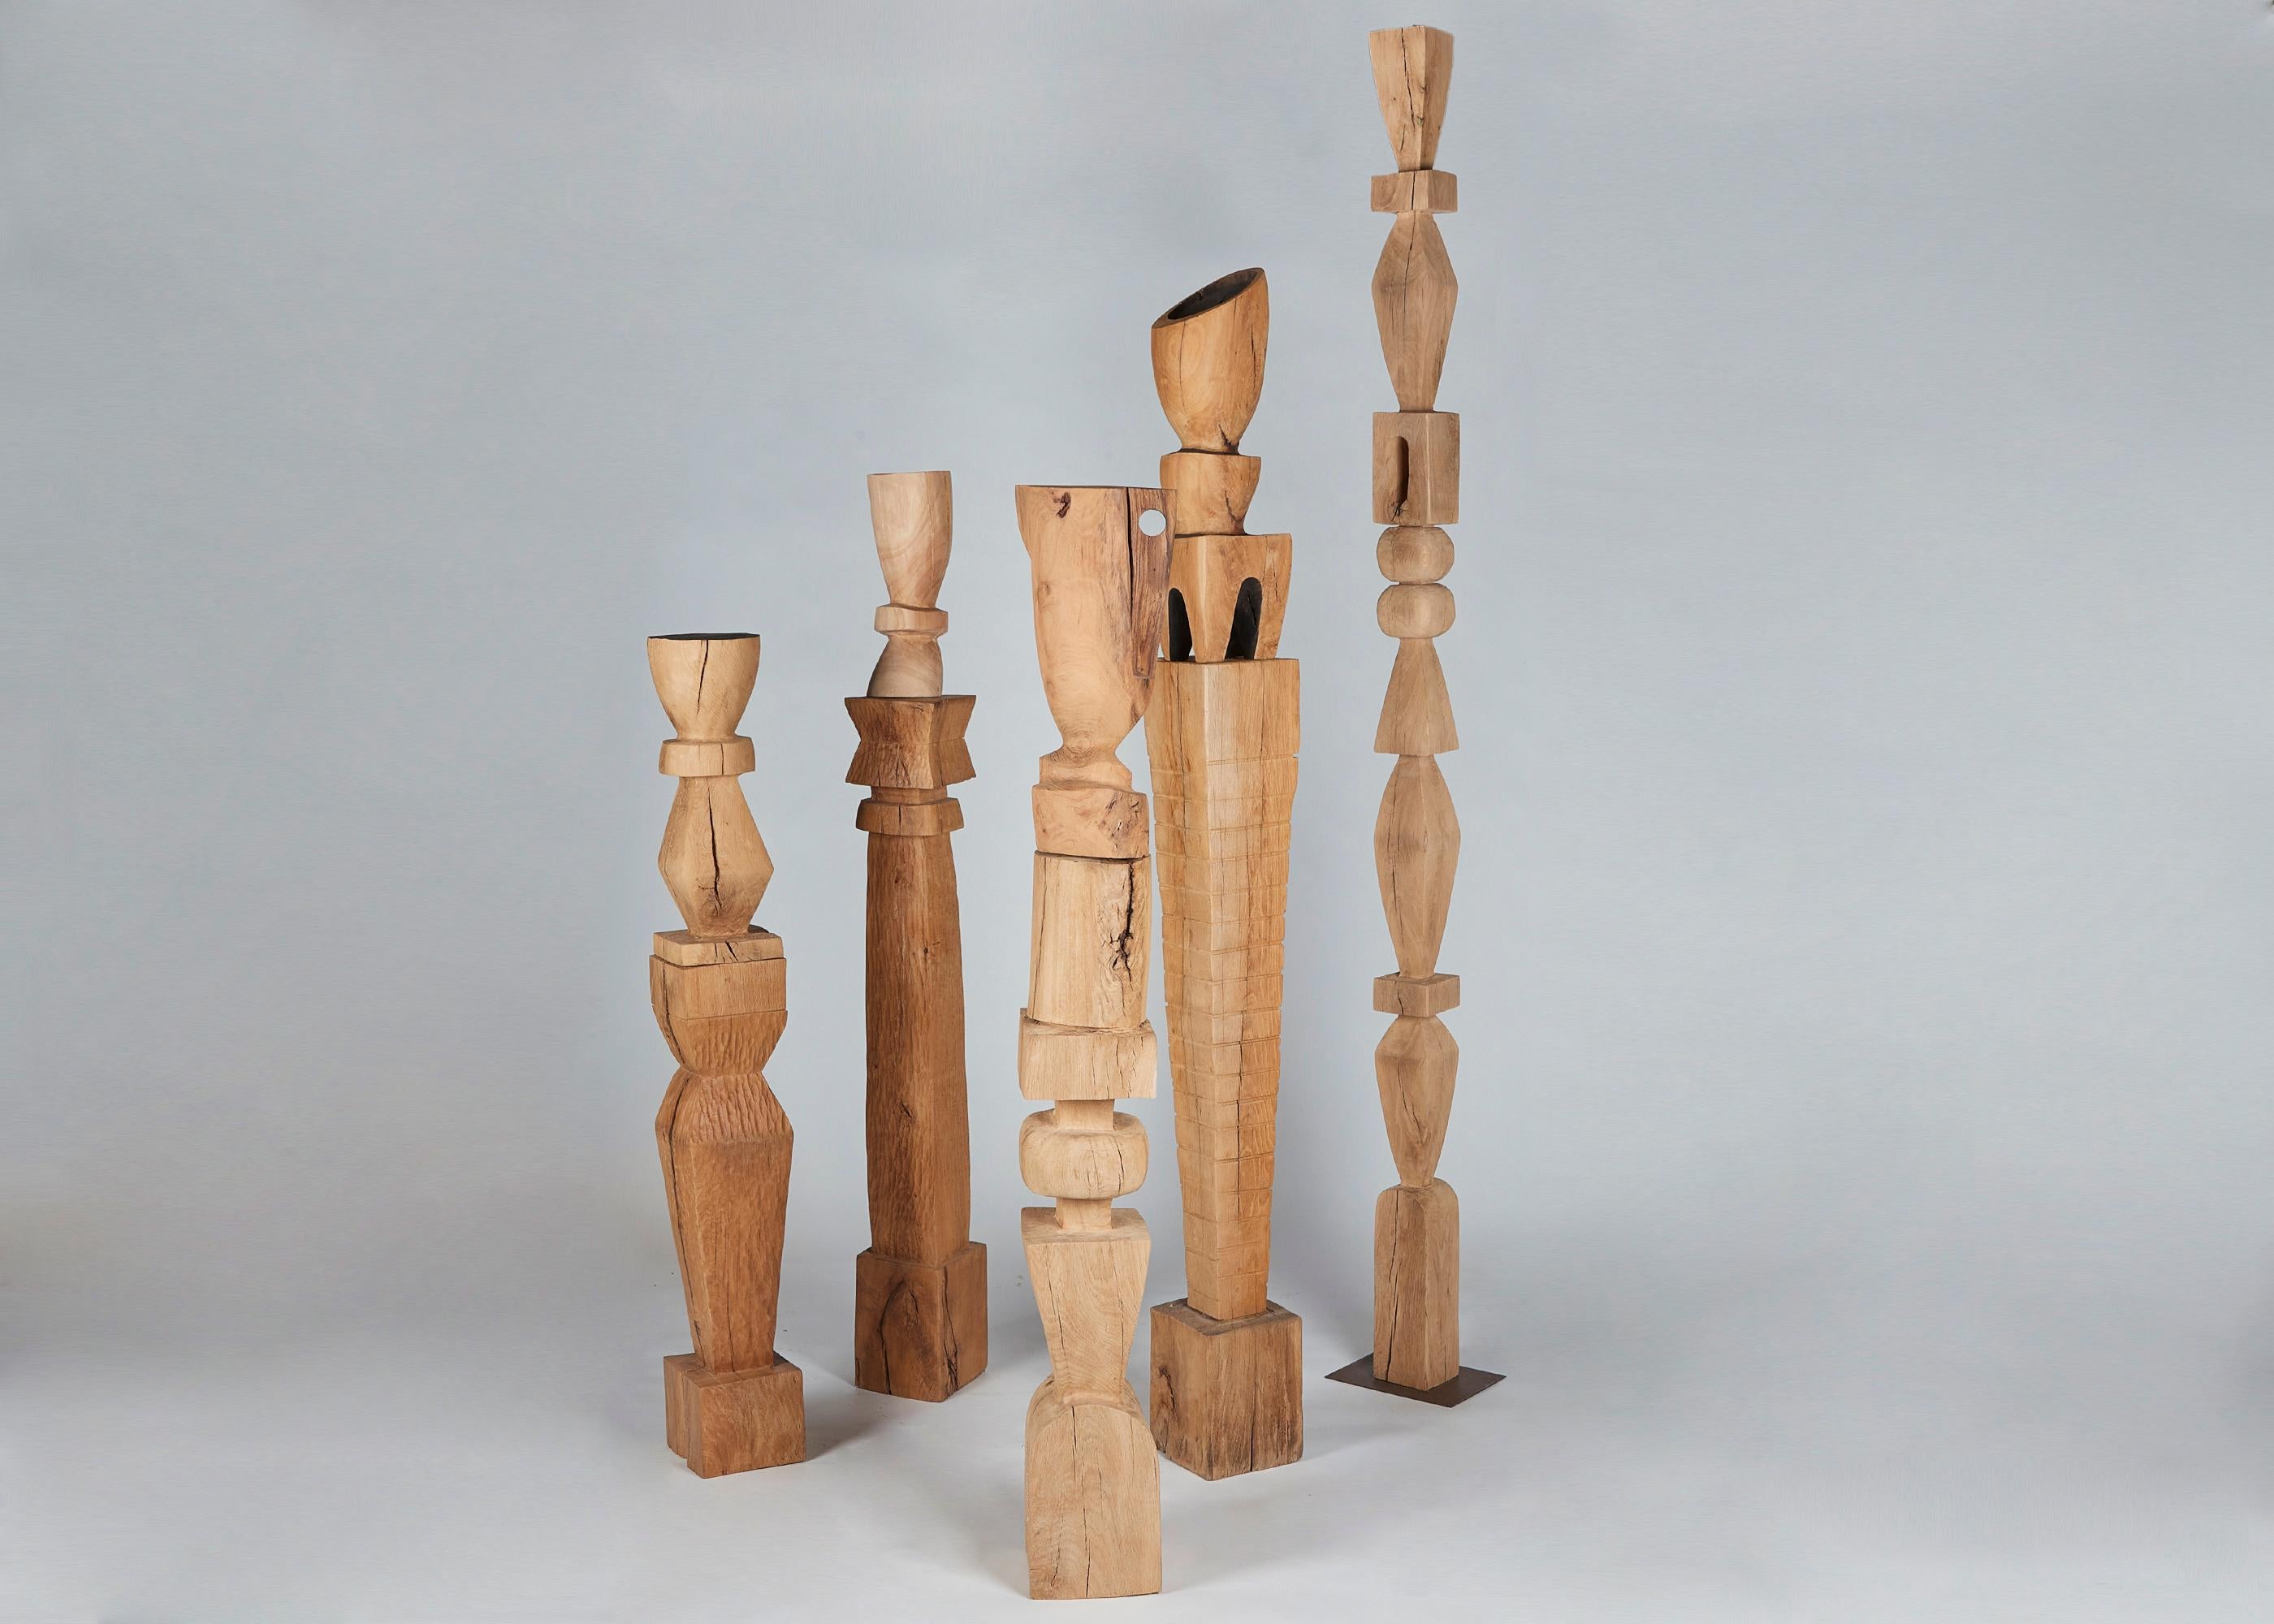 Hand-Carved Franck Evennou, Large-Scale Wooden TOTEM with Finial, France, 2020